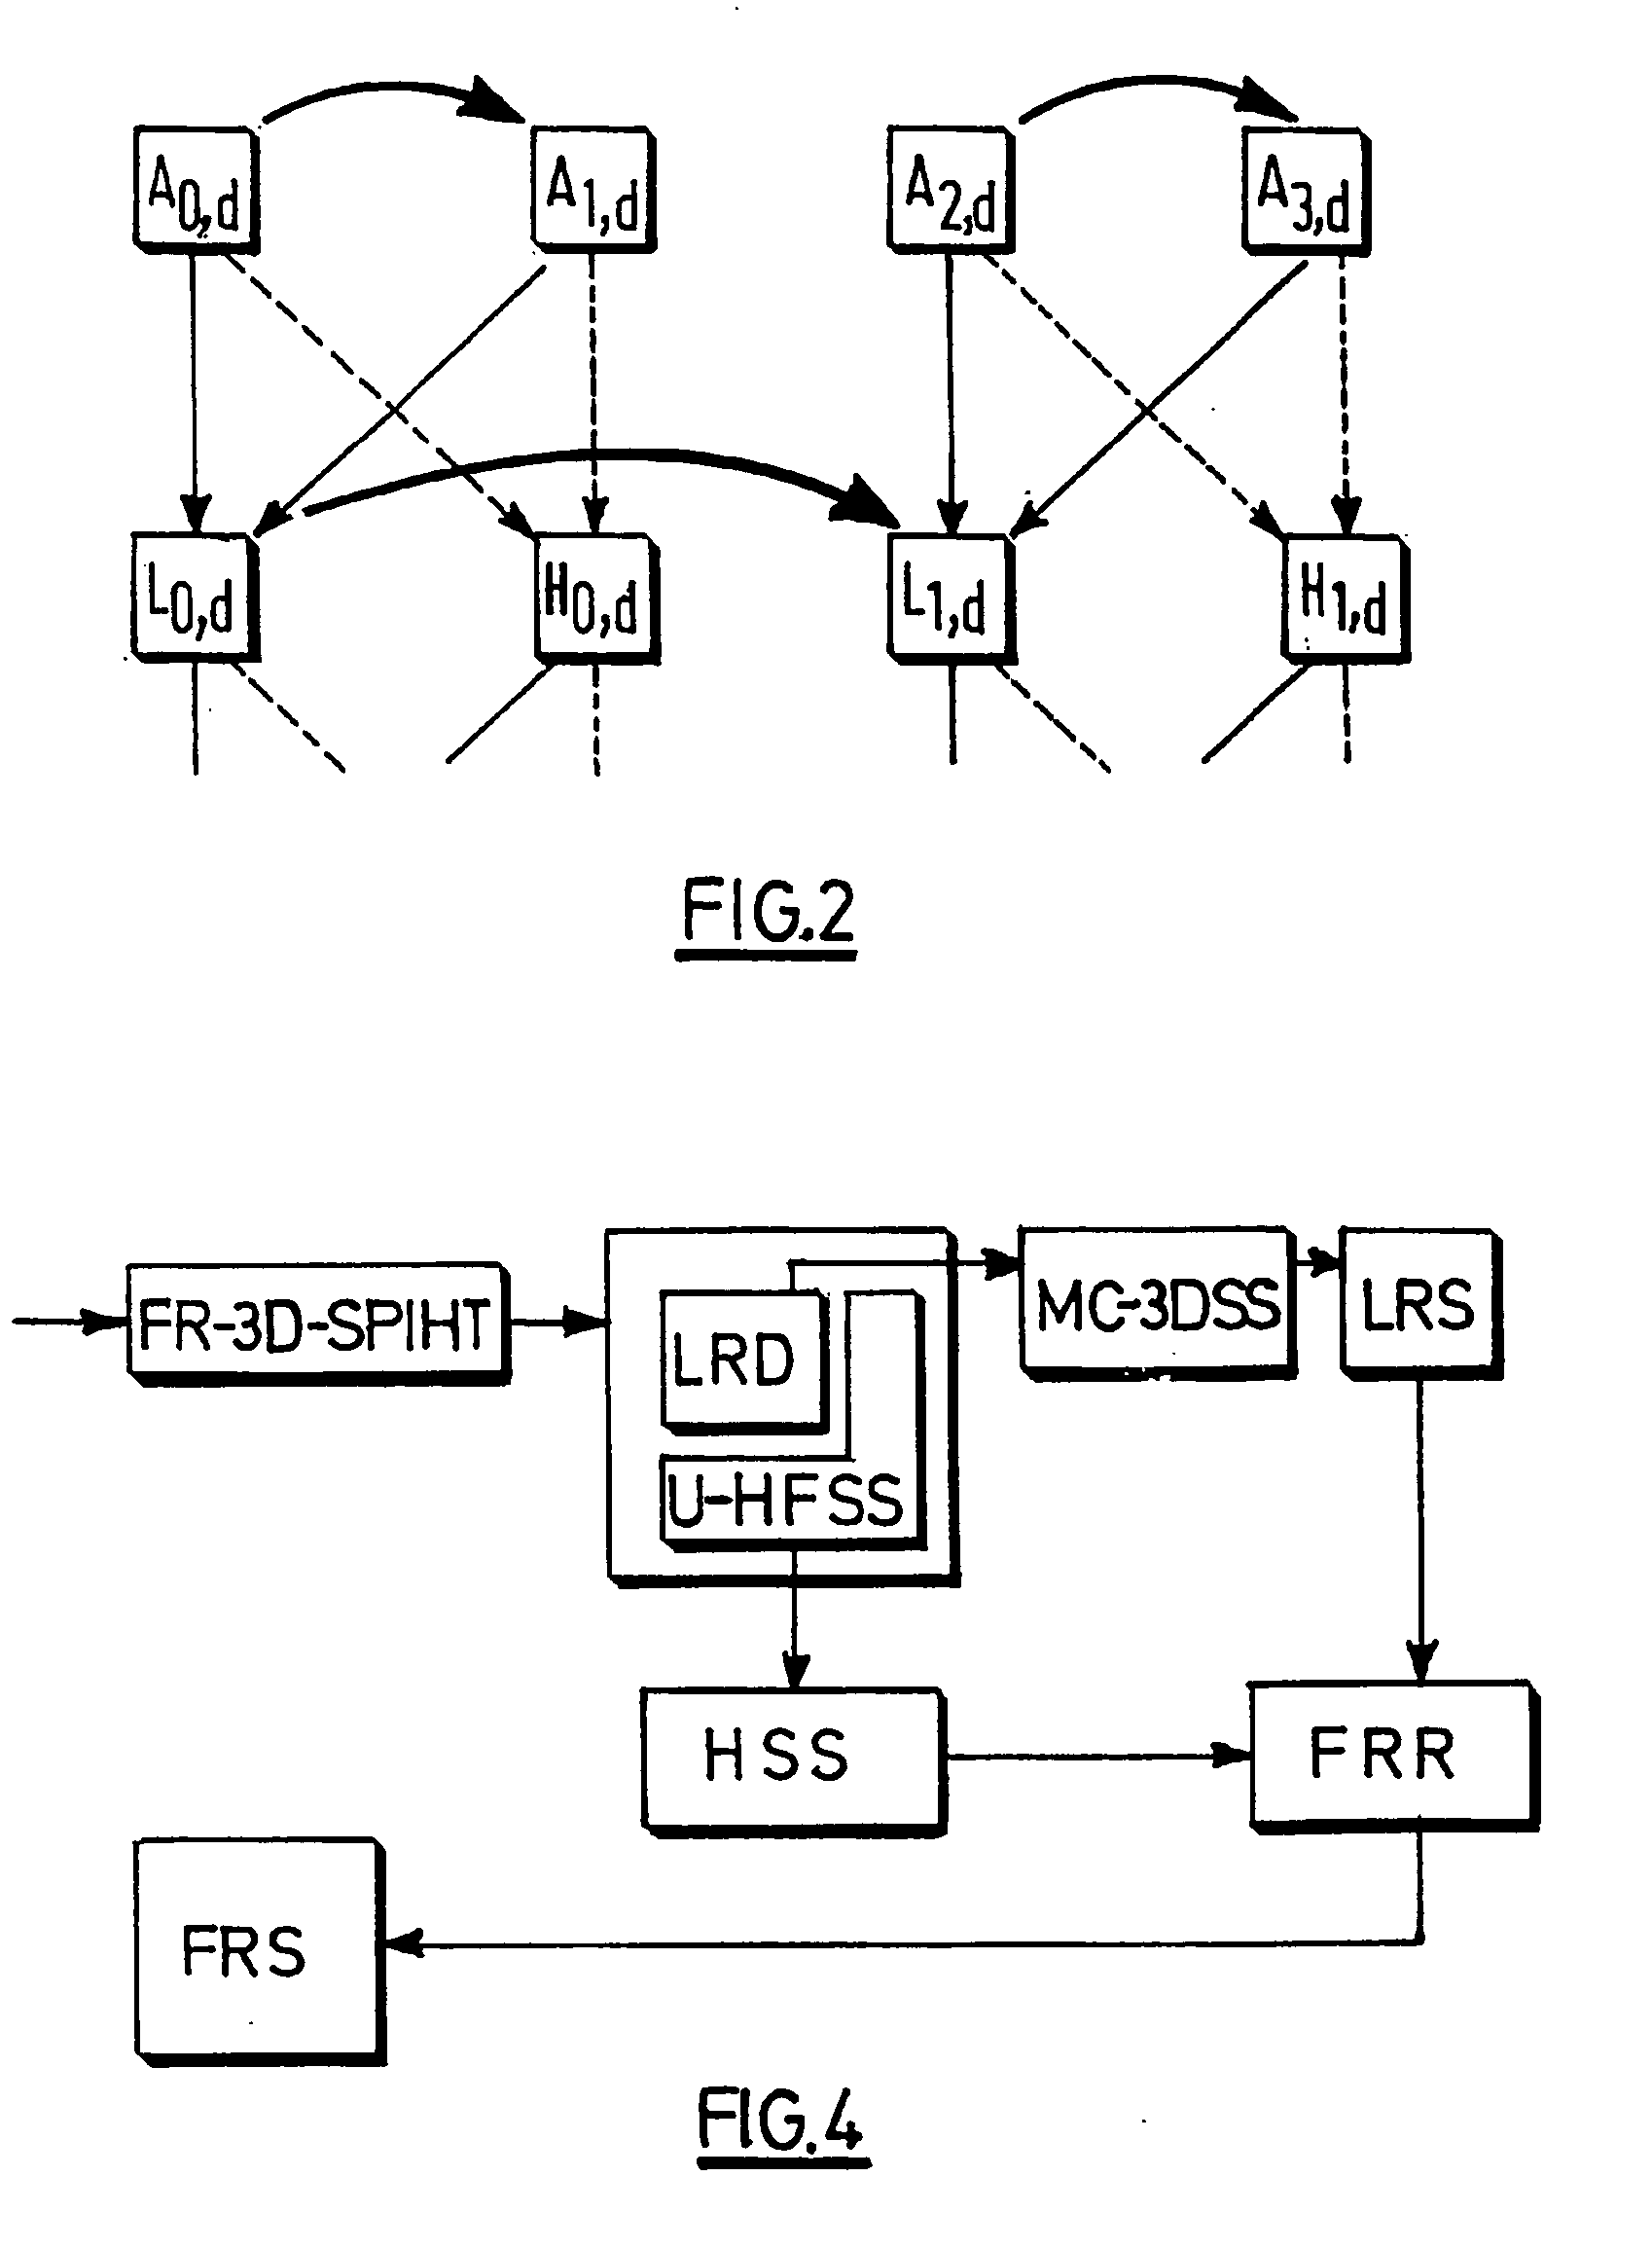 Drift-free video encoding and decoding method and corresponding devices